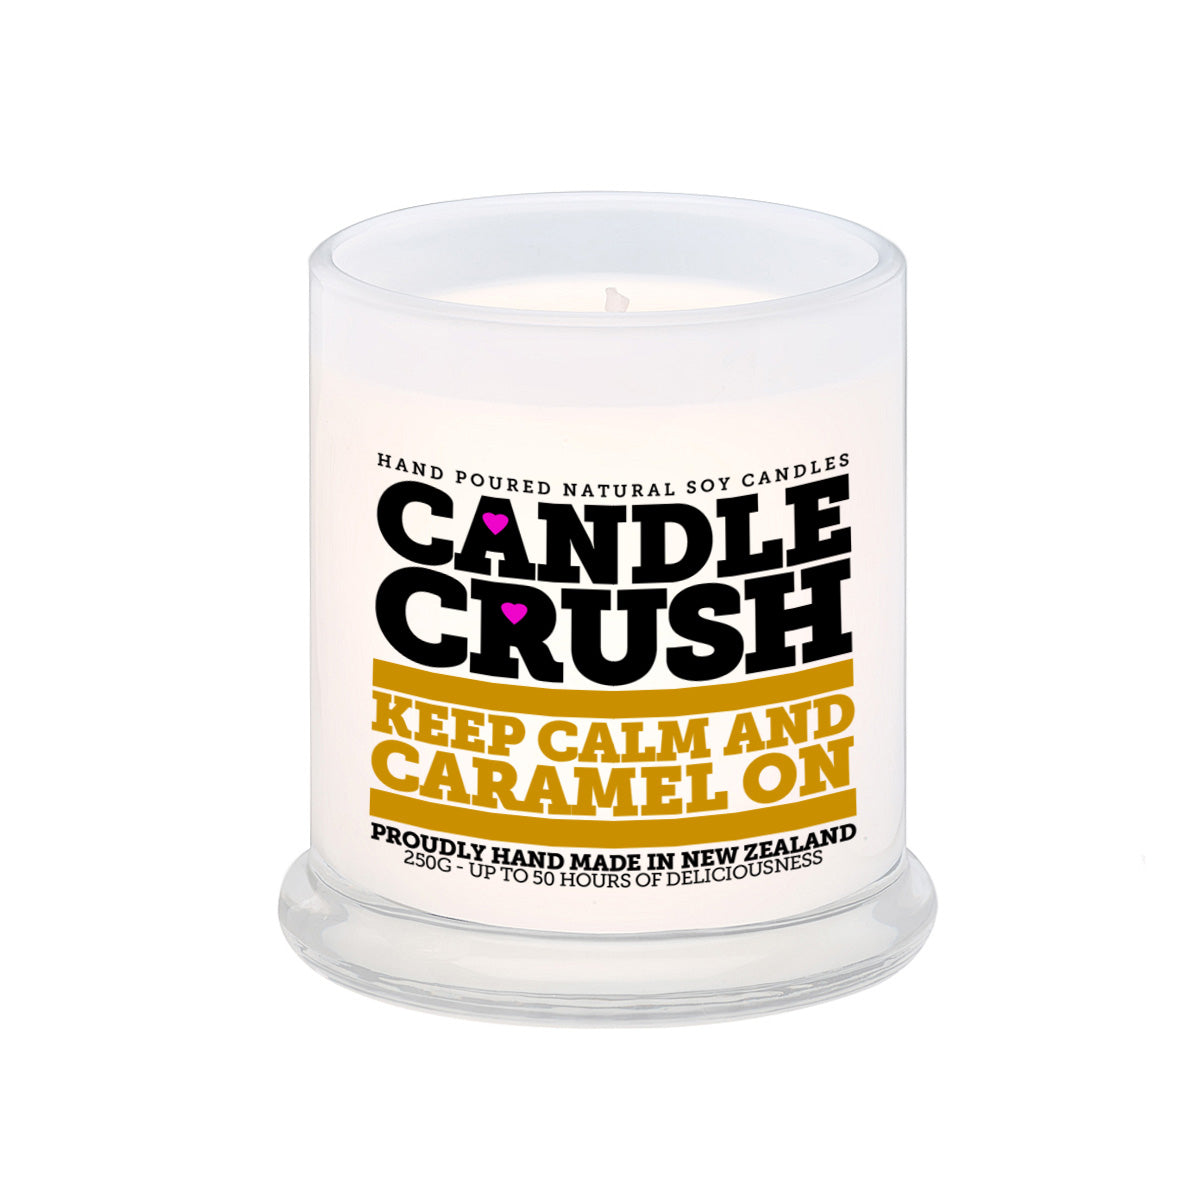 KEEP CALM AND CARAMEL ON CANDLE